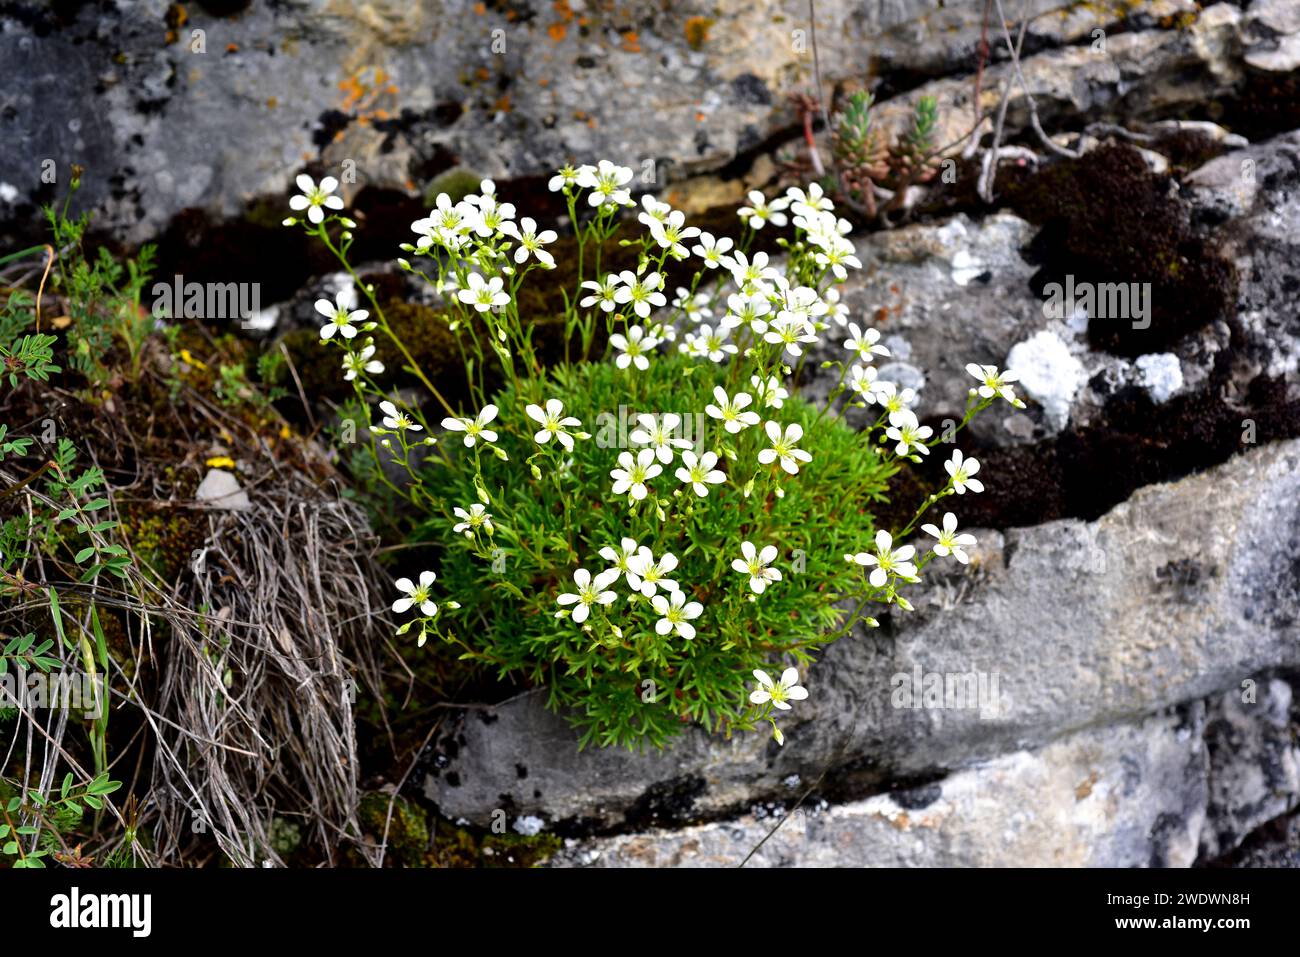 Saxifraga canaliculata is a perennial herb endemic to Cantabrian Mountains. This photo was taken in Babia, Leon province, Castilla-Leon, Spain. Stock Photo